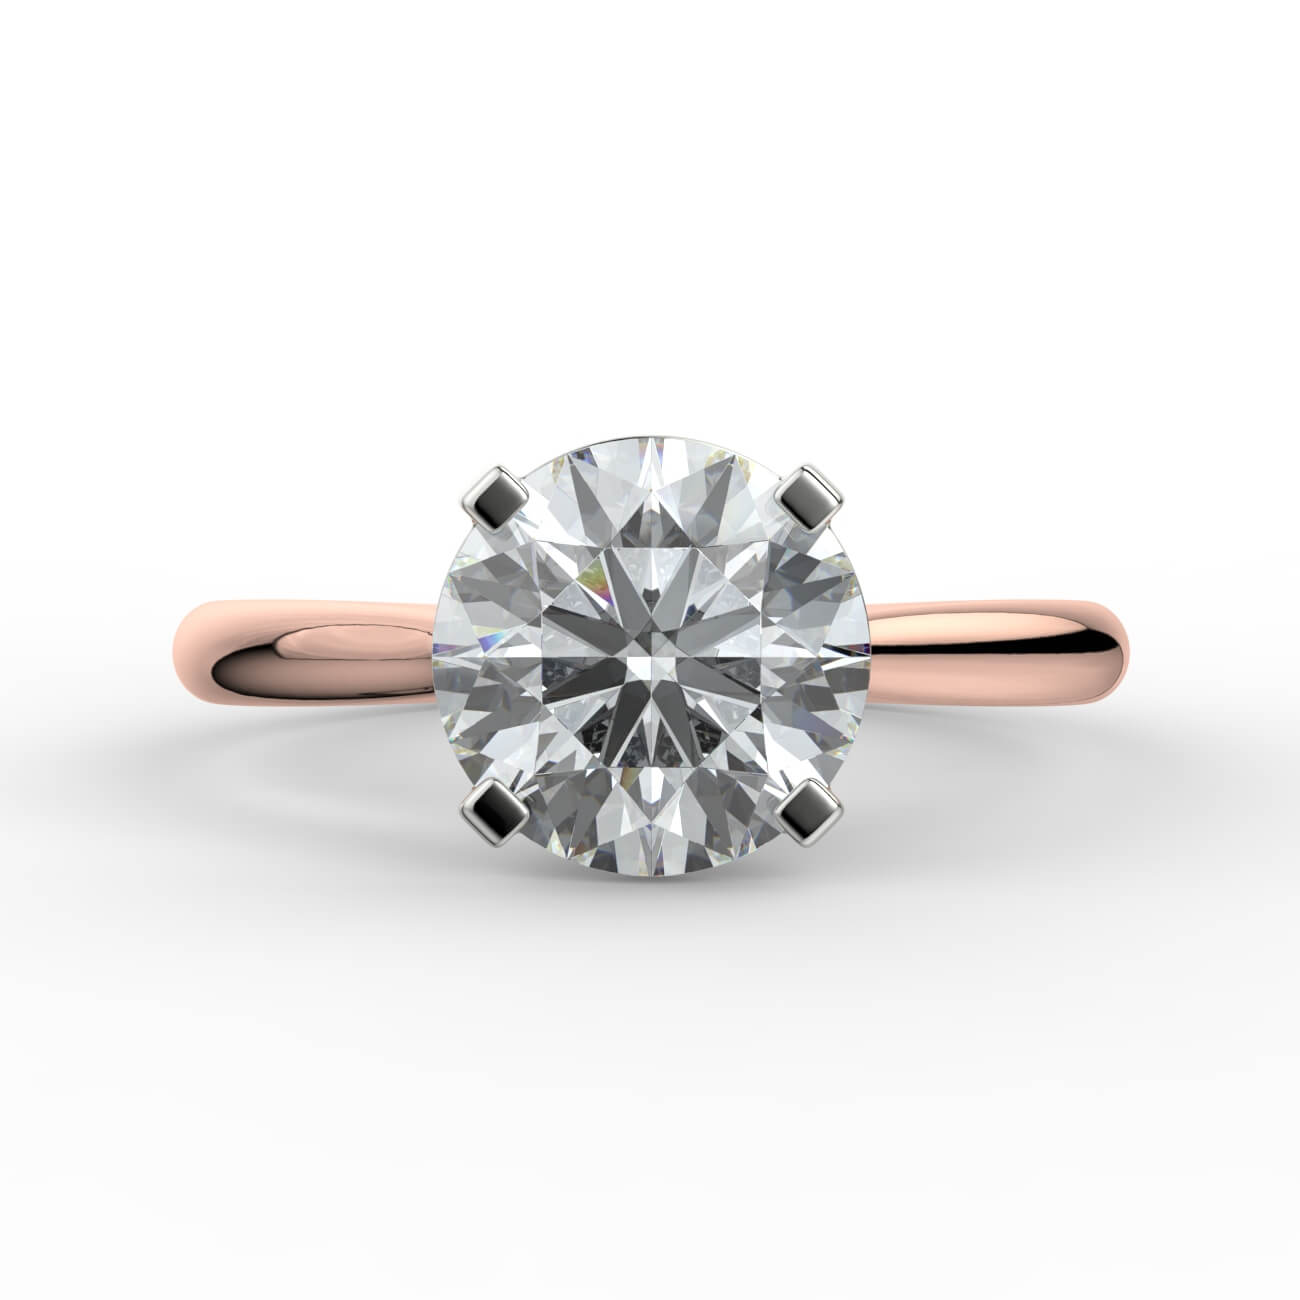 Round brilliant cut diamond cathedral engagement ring in white and rose gold – Australian Diamond Network